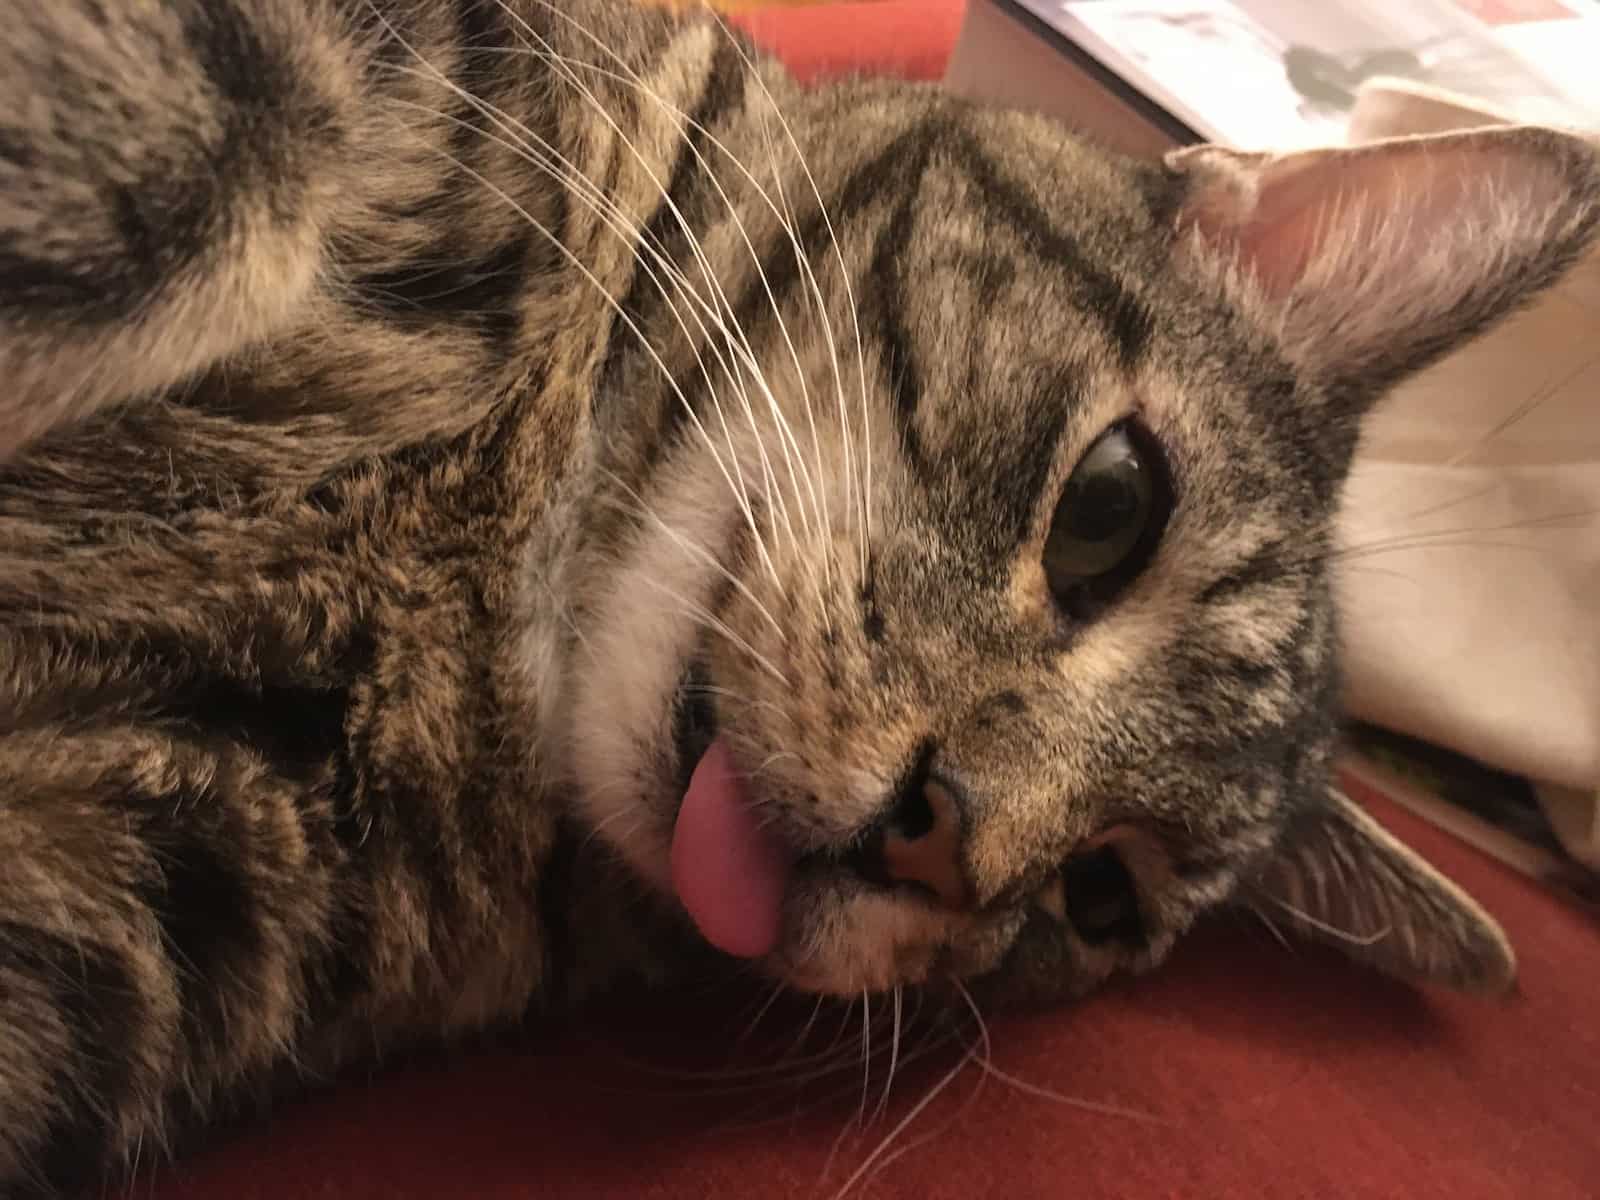 Bill with his tongue stuck out.